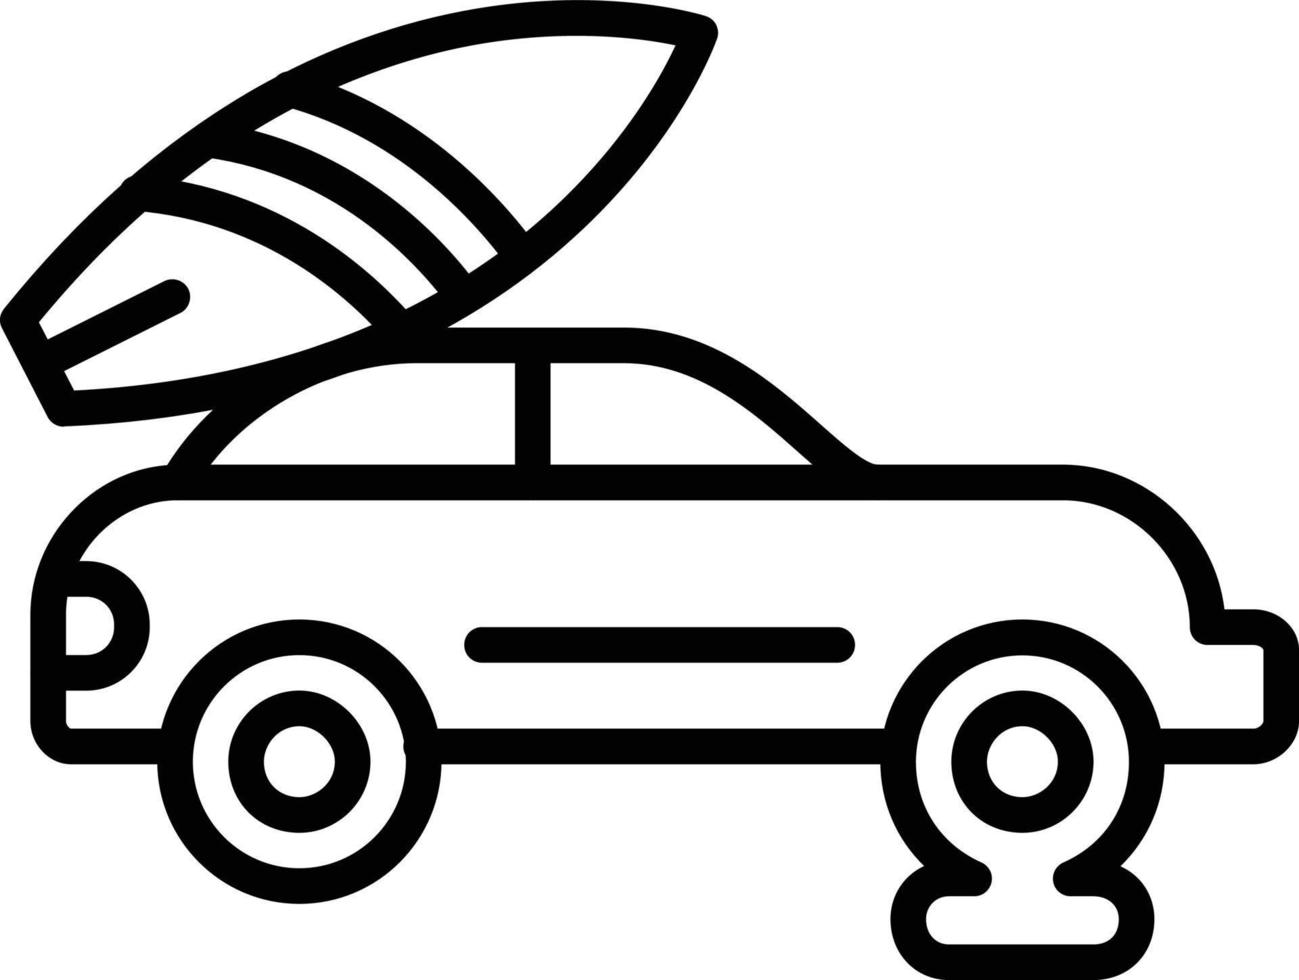 Puncture Car Line Icon vector